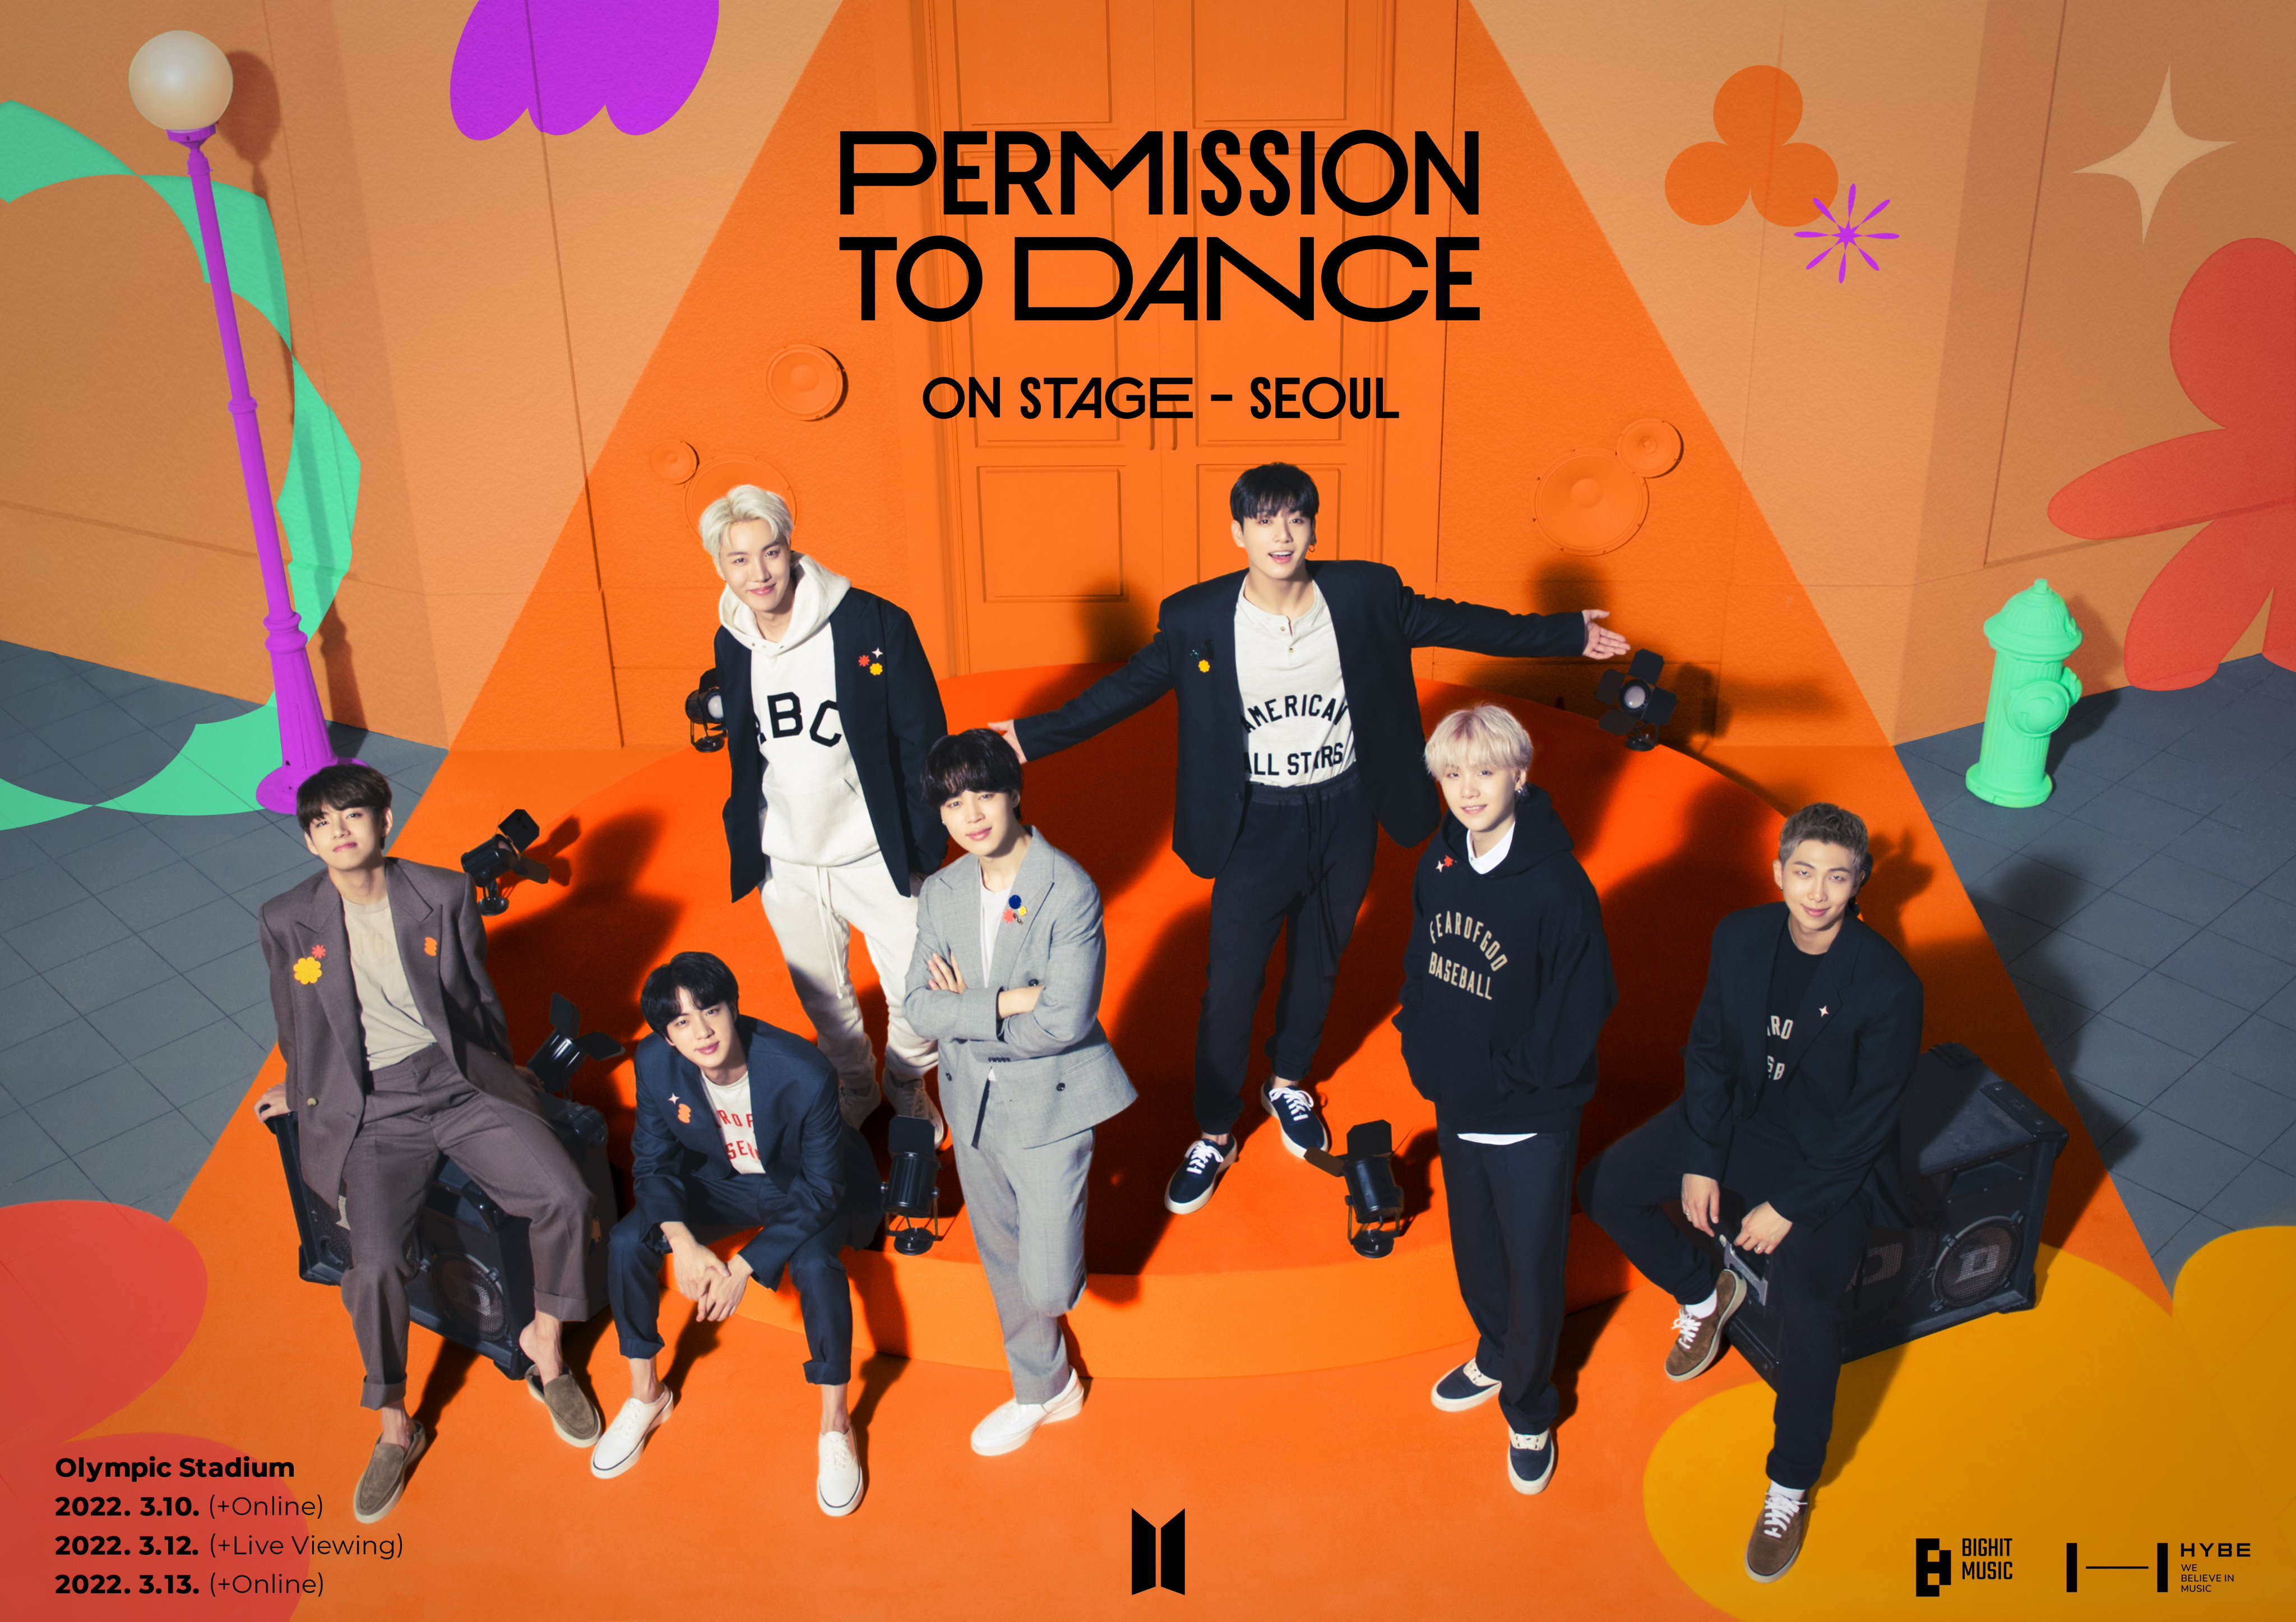 V, Jin, J-Hope, Jimin, Jungkook, Suga, and RM on a promotional poster for 'Permission to Dance On Stage - Seoul'